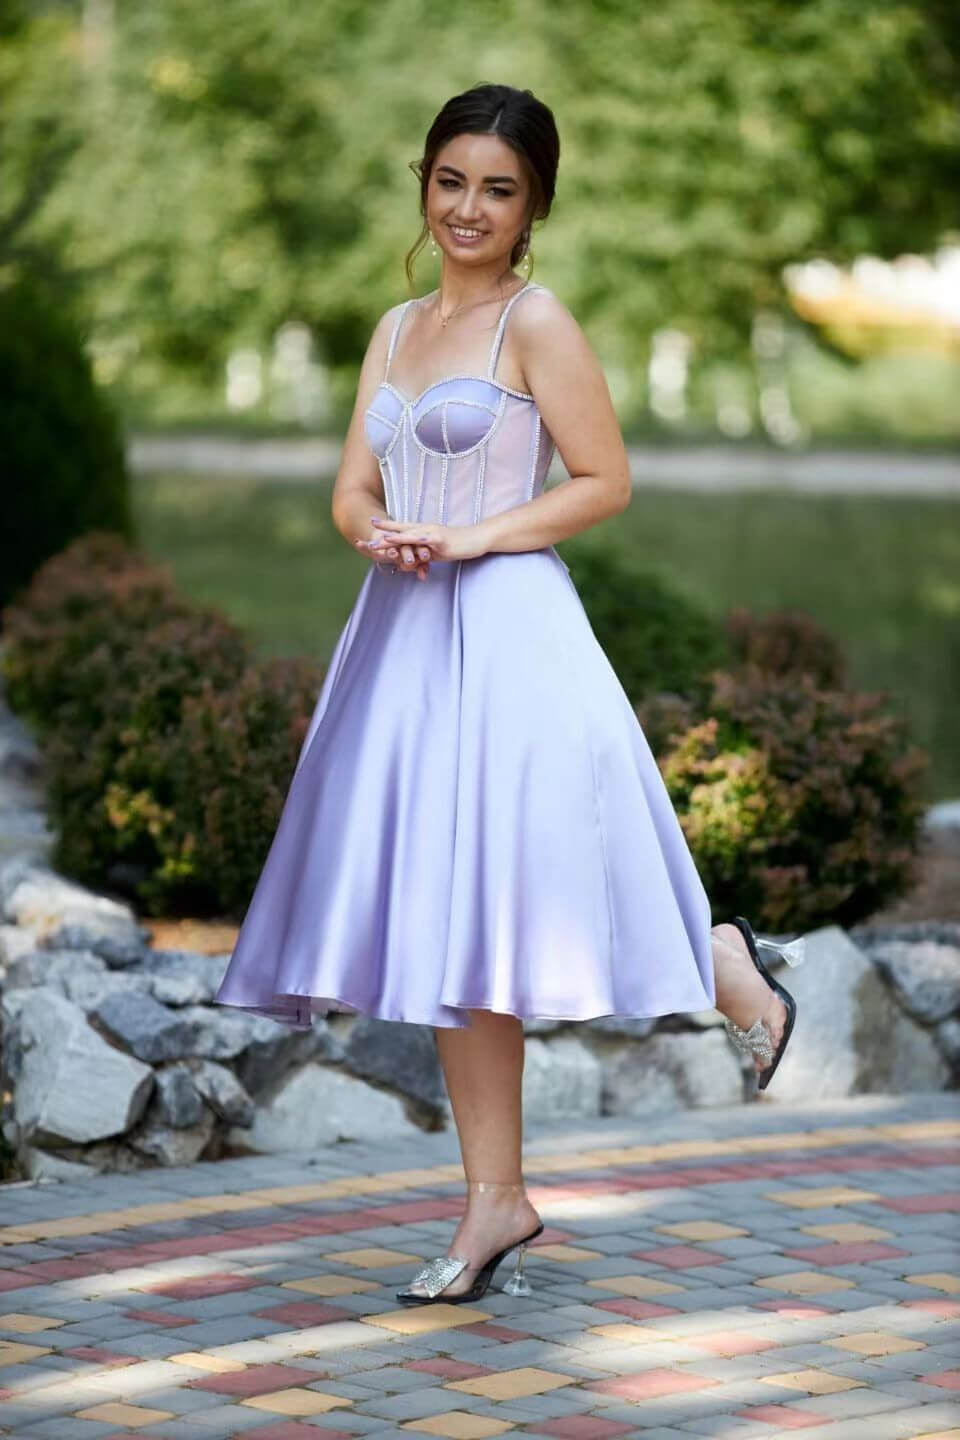 Lilac Evening Dress with Sleeveless Spaghetti Straps & Beads